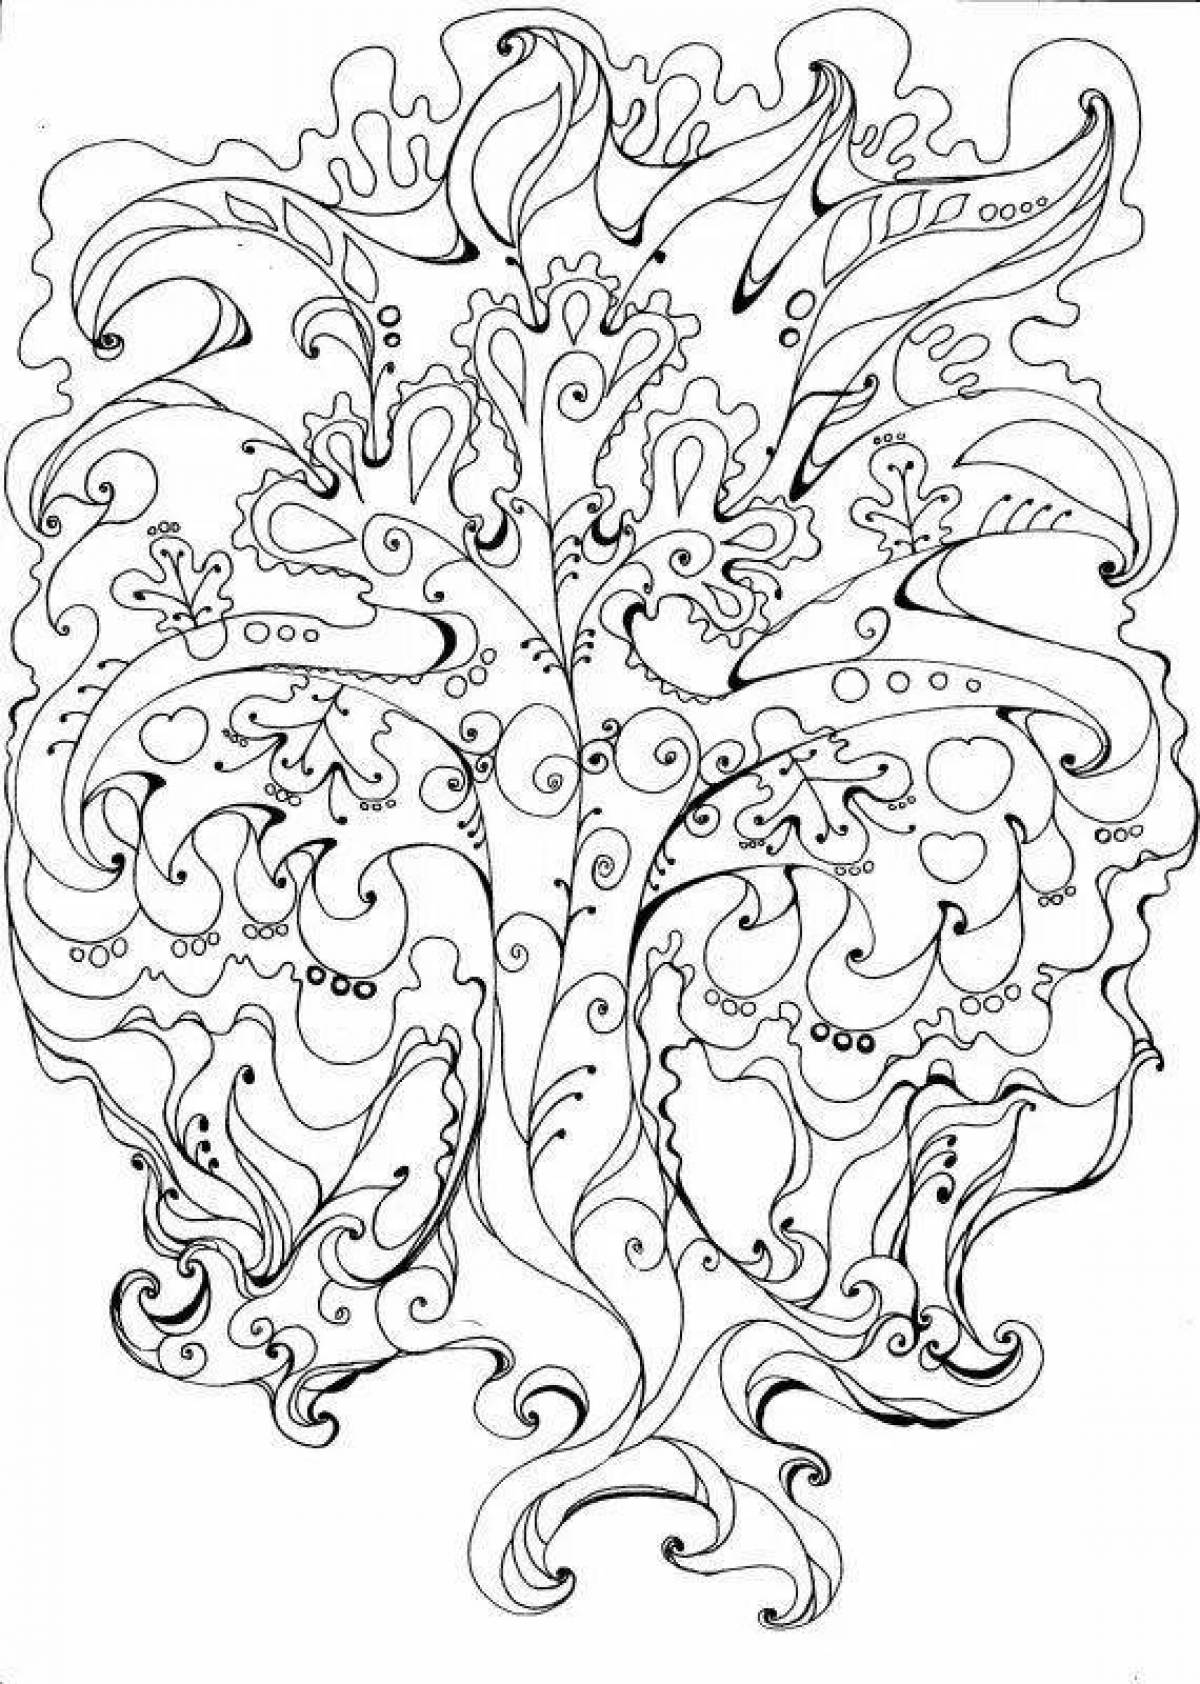 Impressive tree of life coloring page